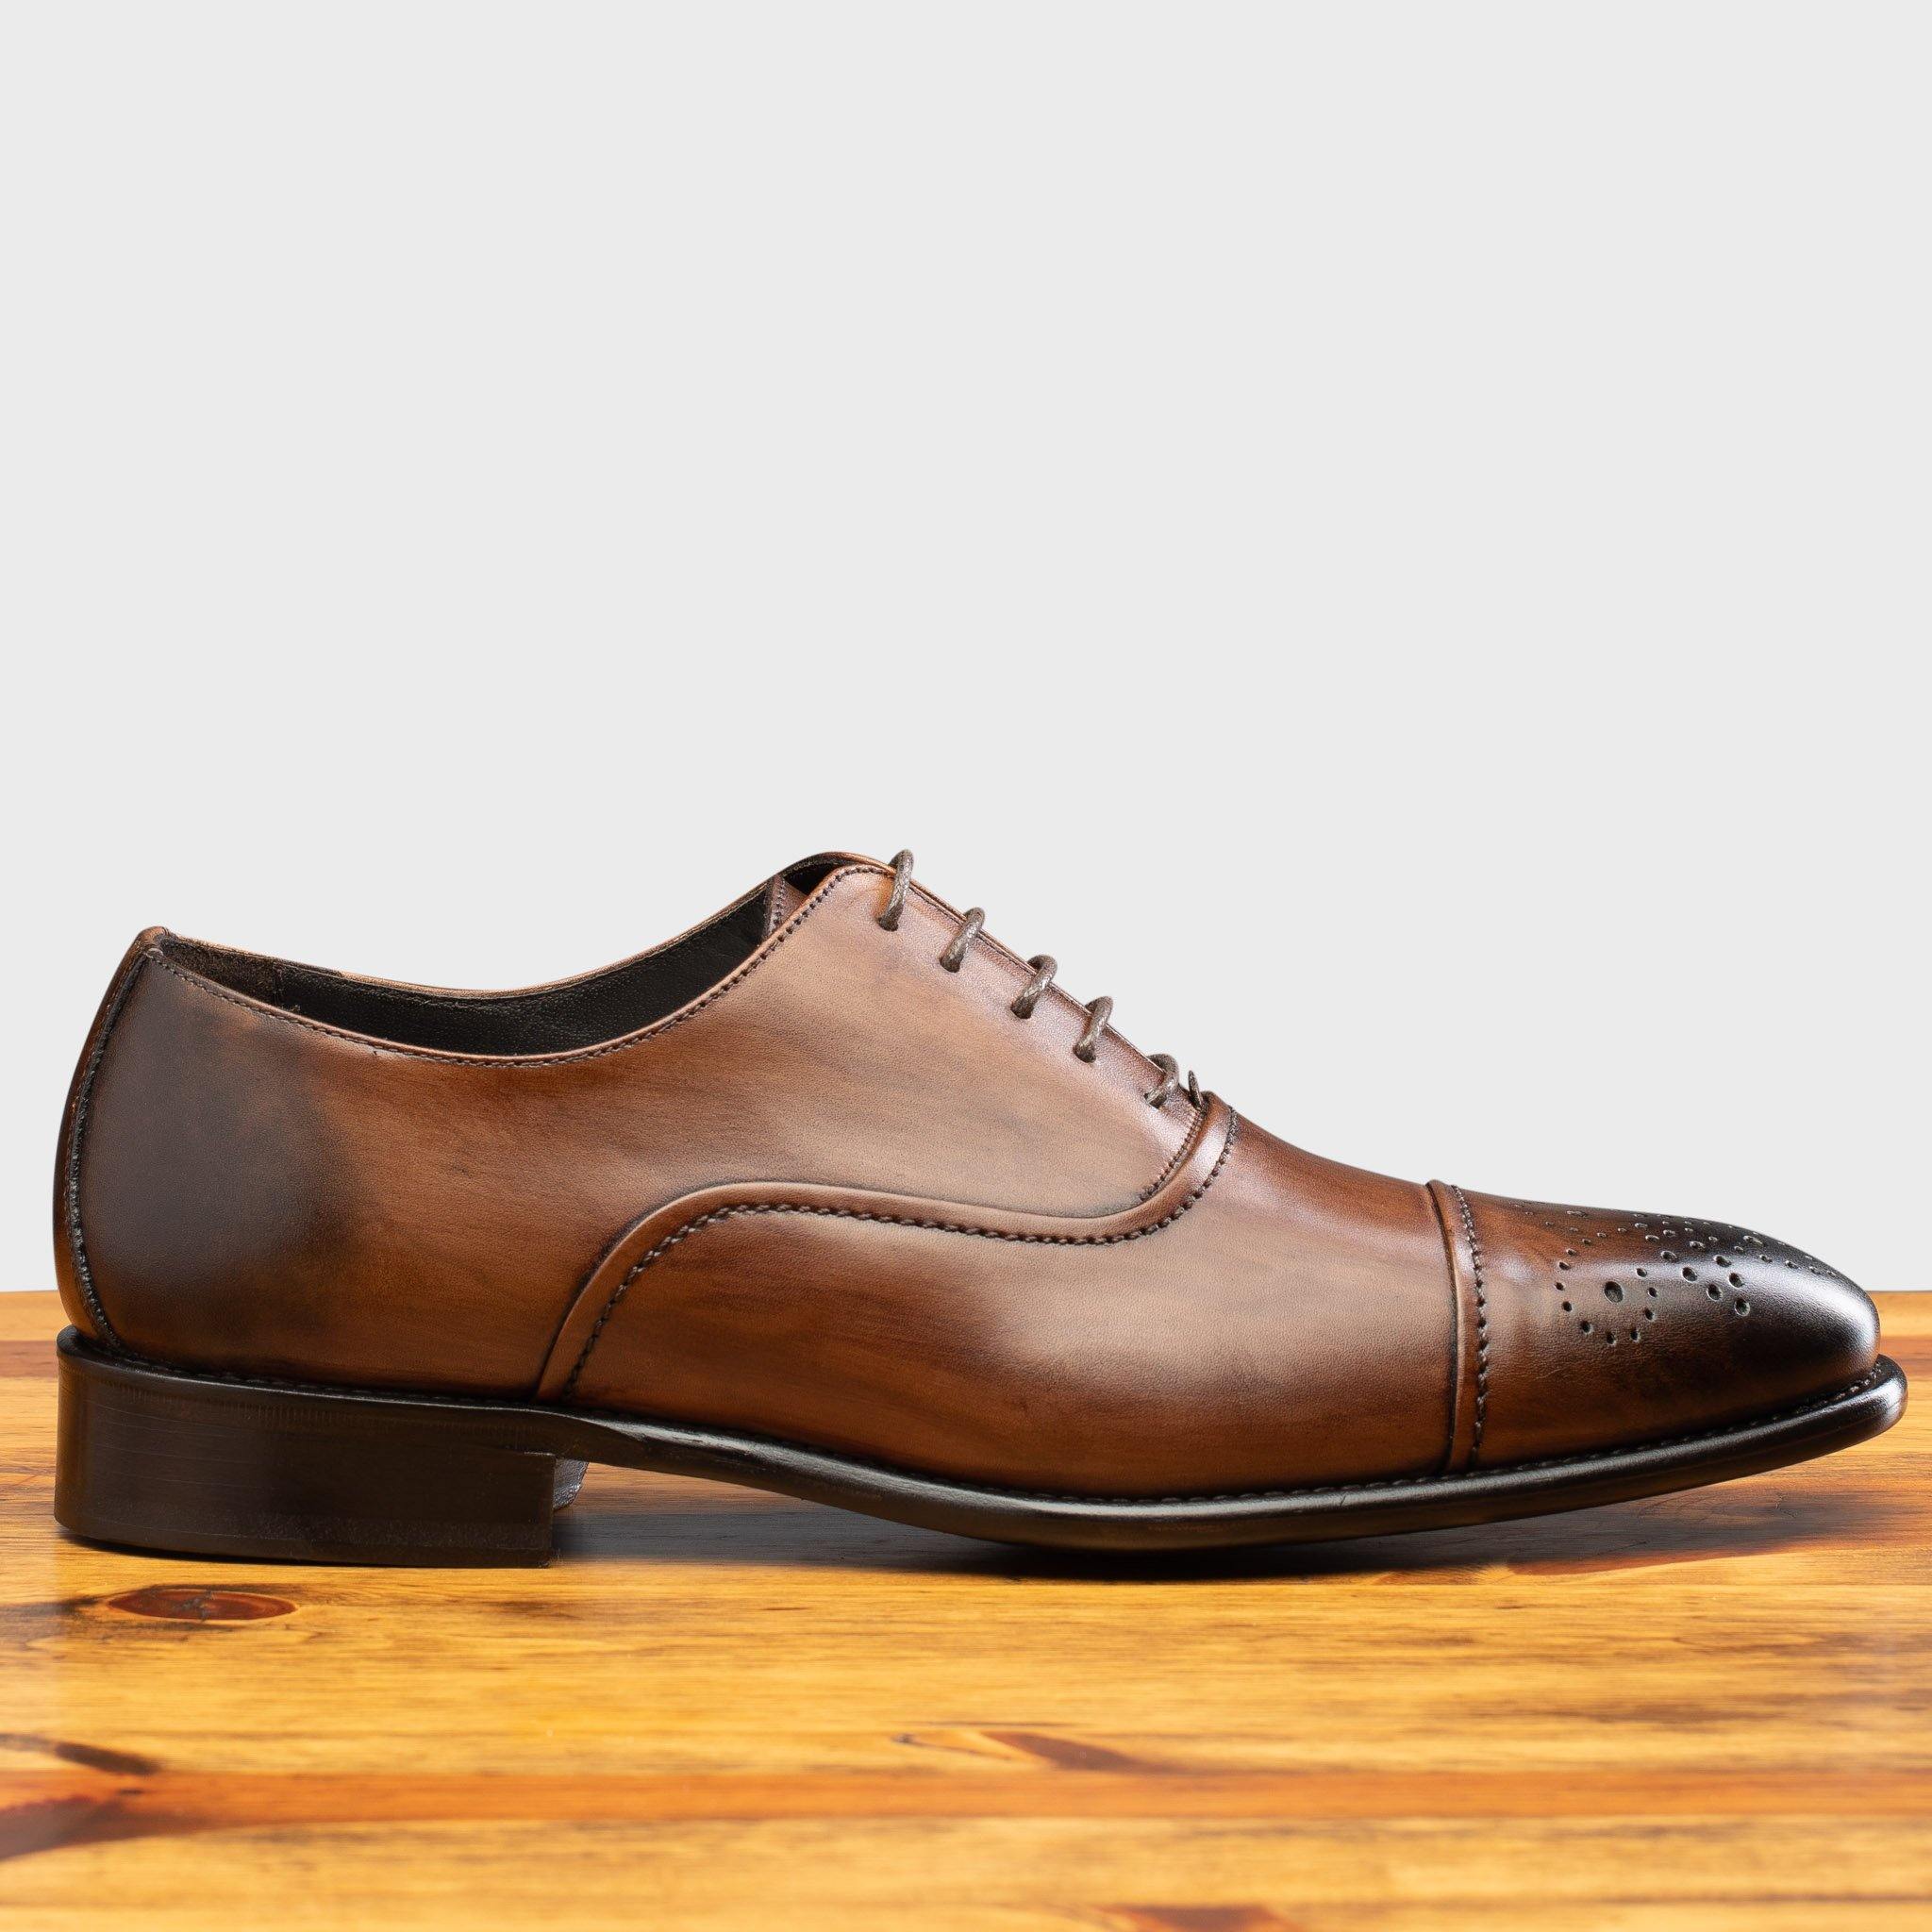 Side profile of the 2361 Calzoleria Toscana Brown Cayenne Calf Cap-Toe on a wooden table